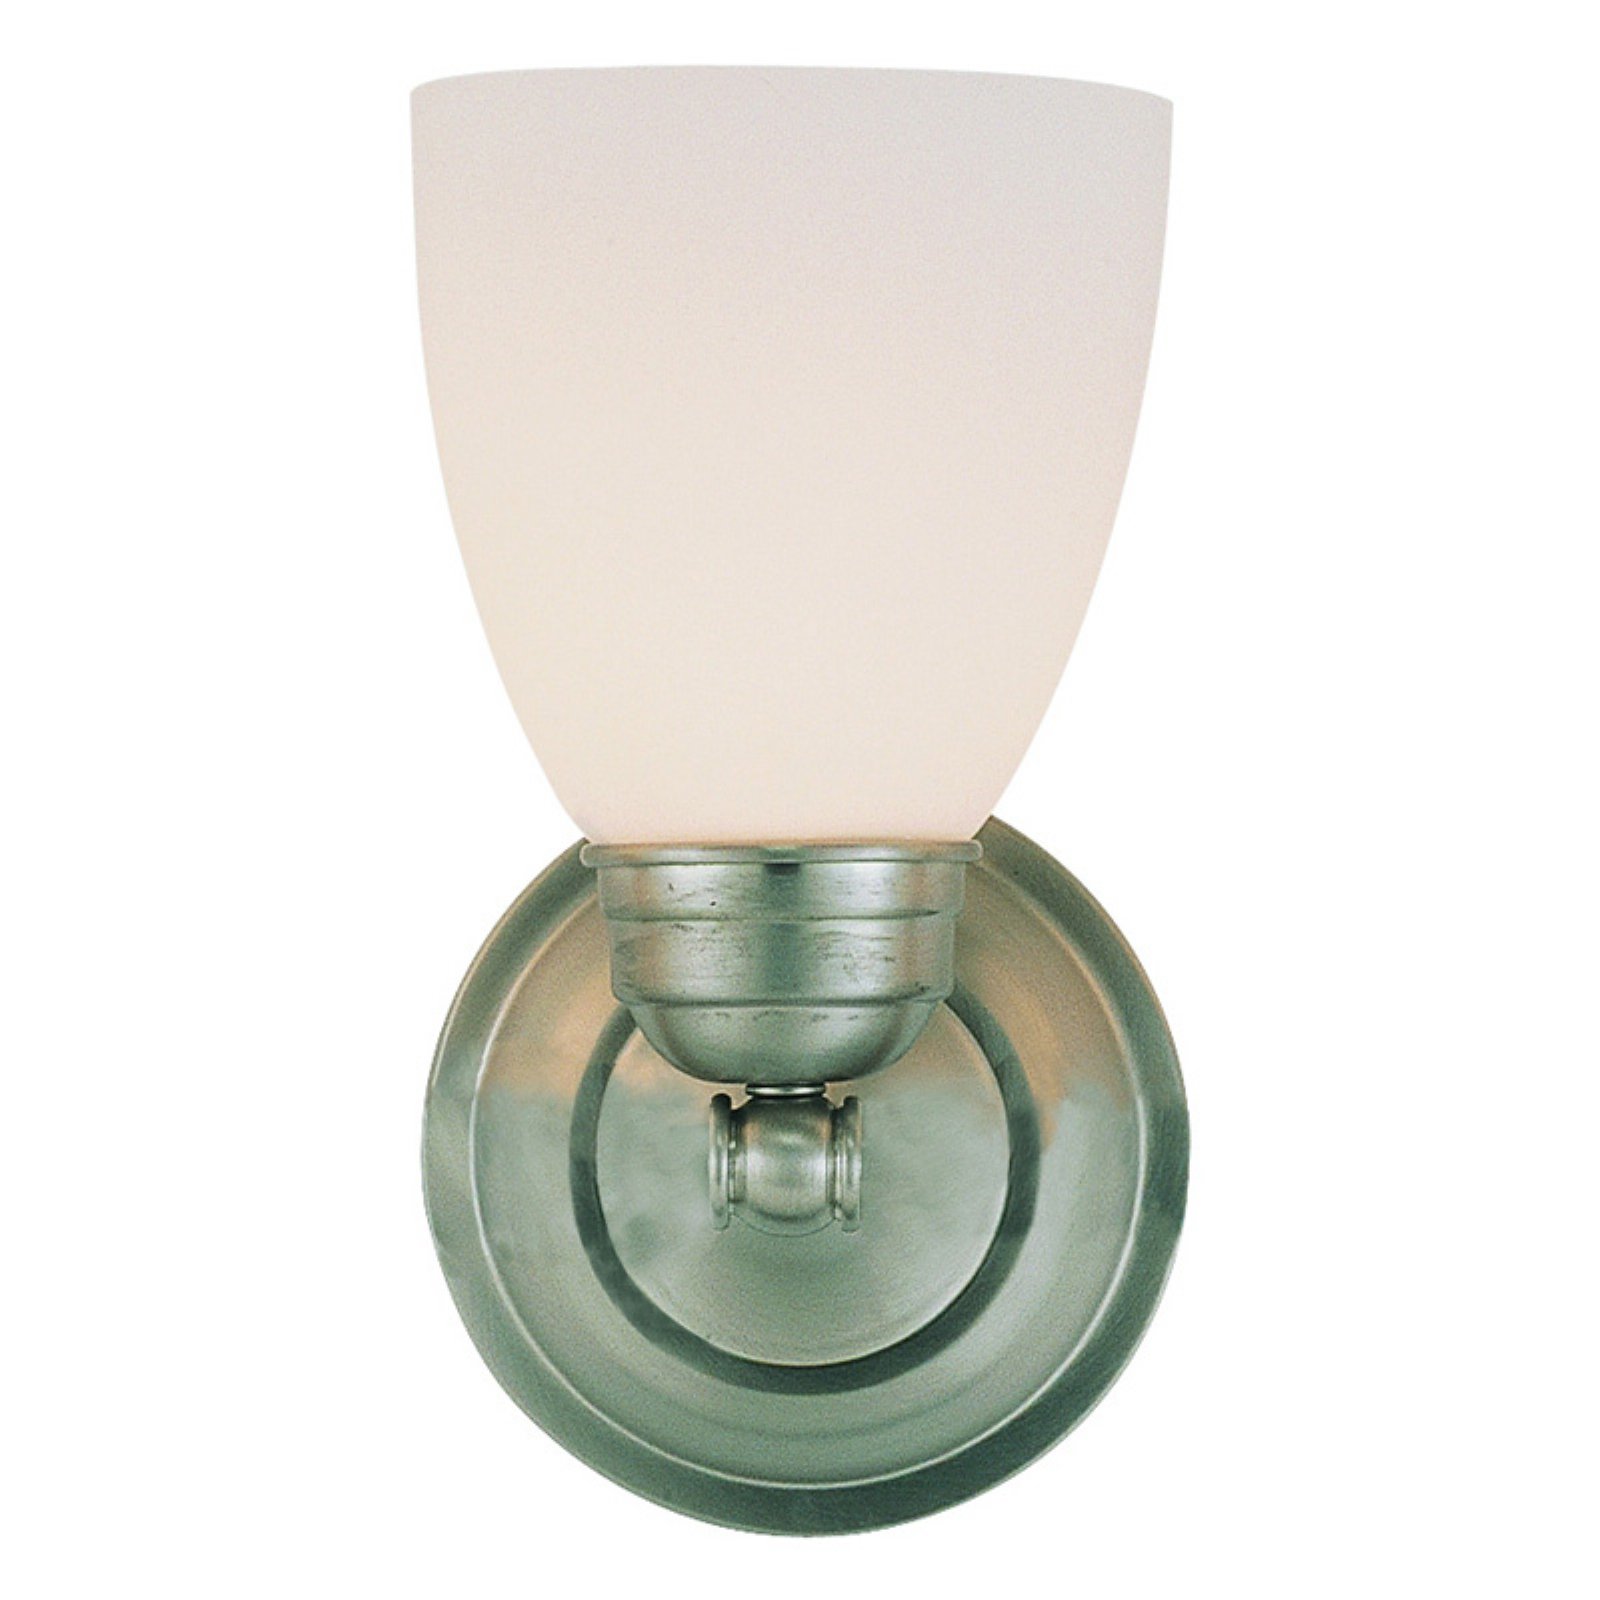 Bel Air Lighting Ardmore 1-Light Brushed Nickel Silver Wall Sconce - image 1 of 2